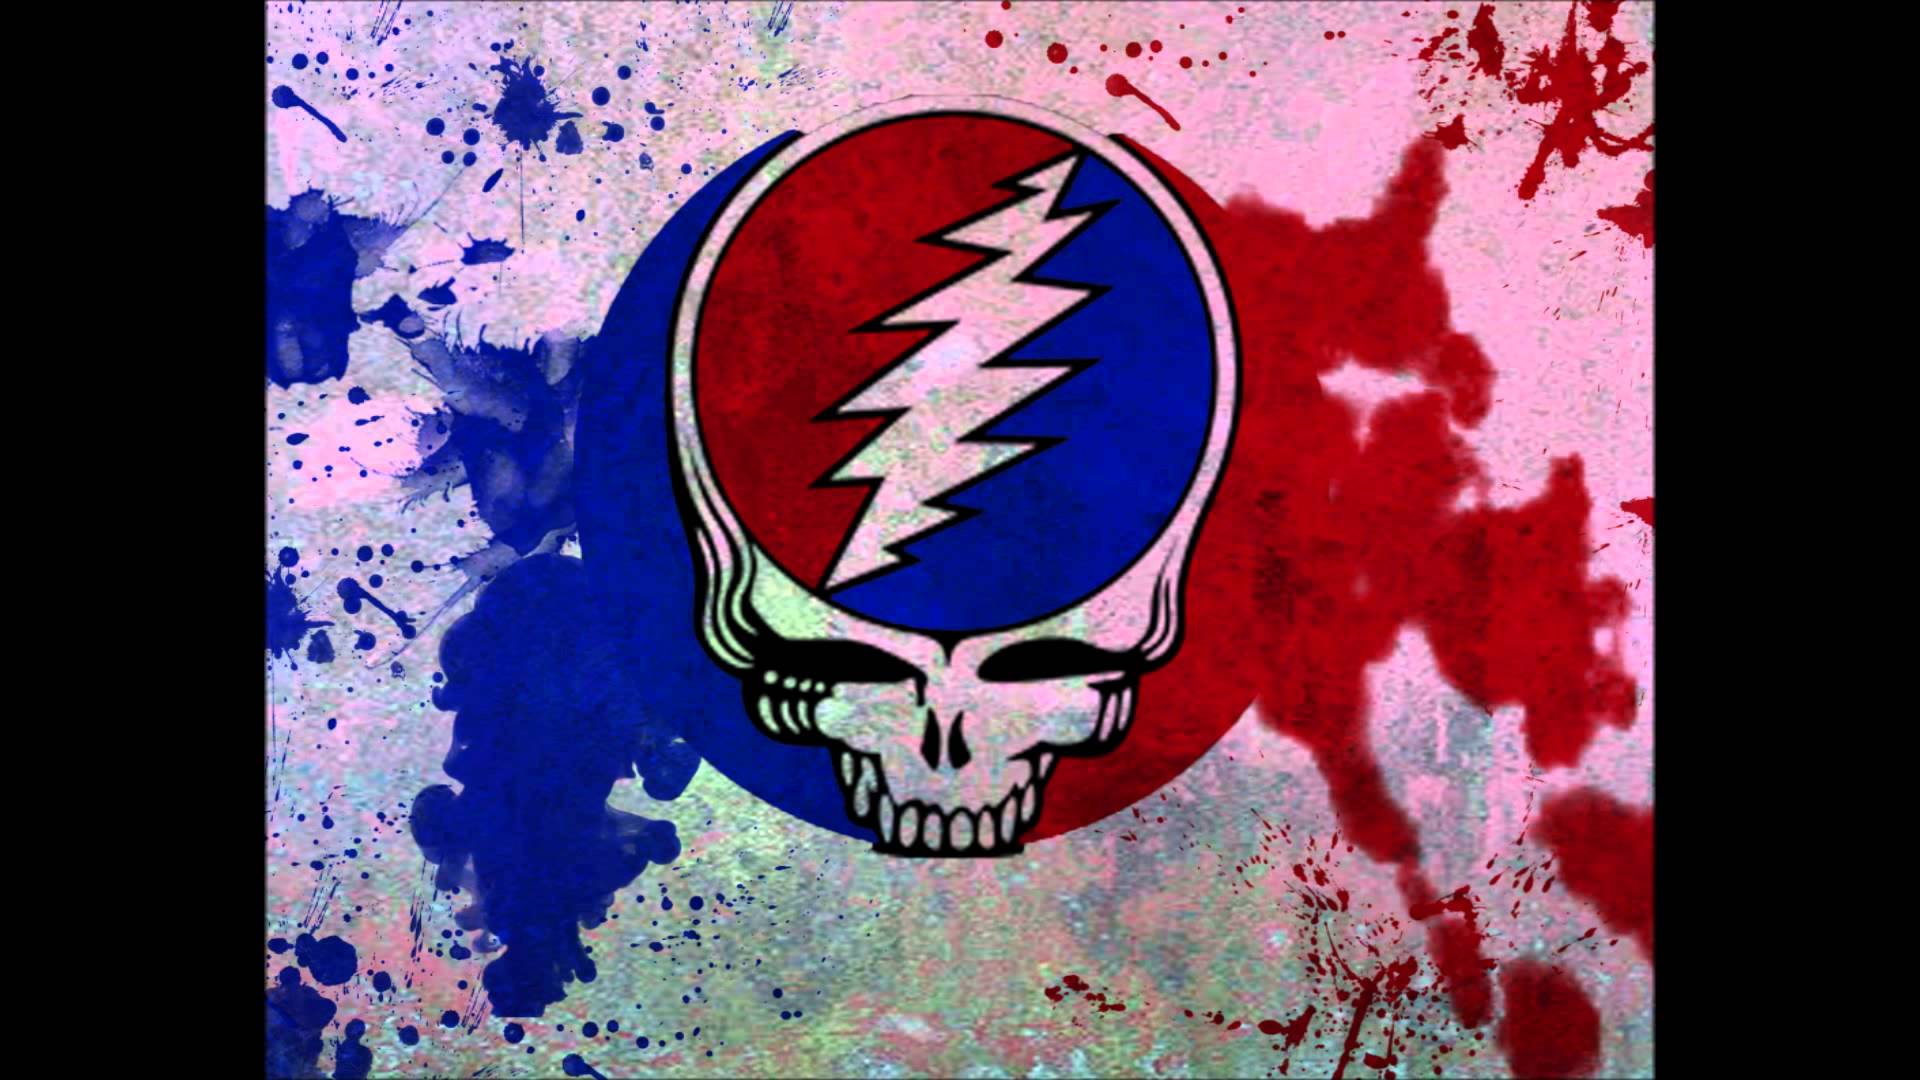 Grateful Dead - Jack-A-Roe 5-6-81 Uniondale, NY live - YouTube